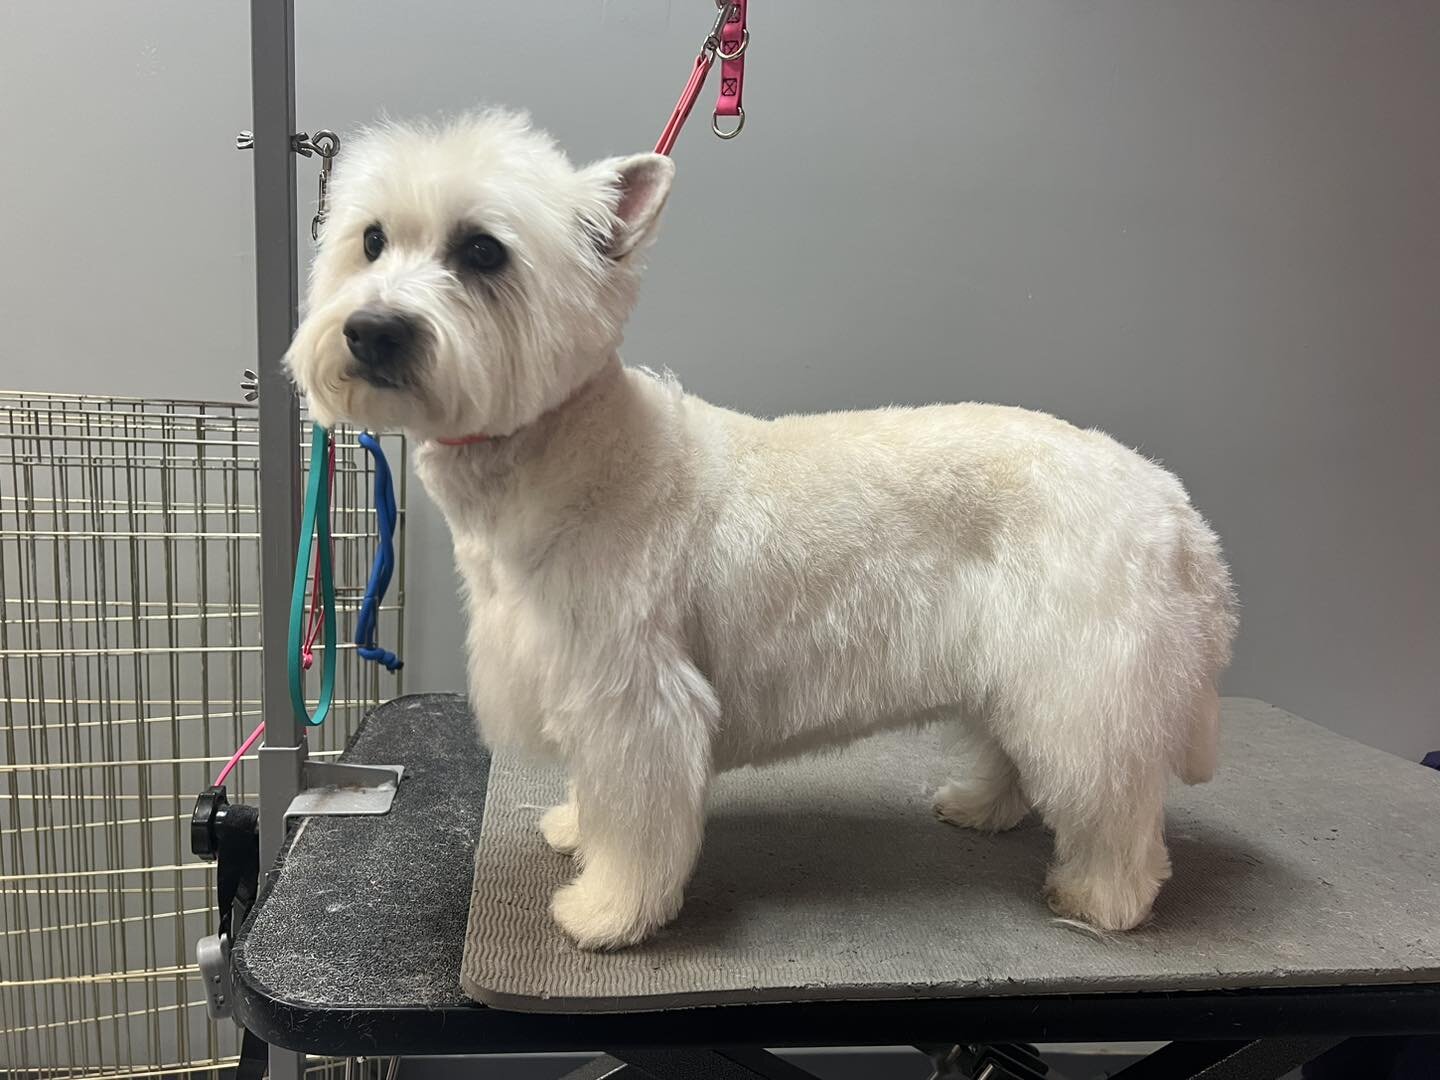 Handsome Ronan! One of our many Westie clients! 

#cagefreegrooming #luxurypetspa #doggrooming #bloomingtonindianapetgroomers #petgrooming #bloomingtonindiana